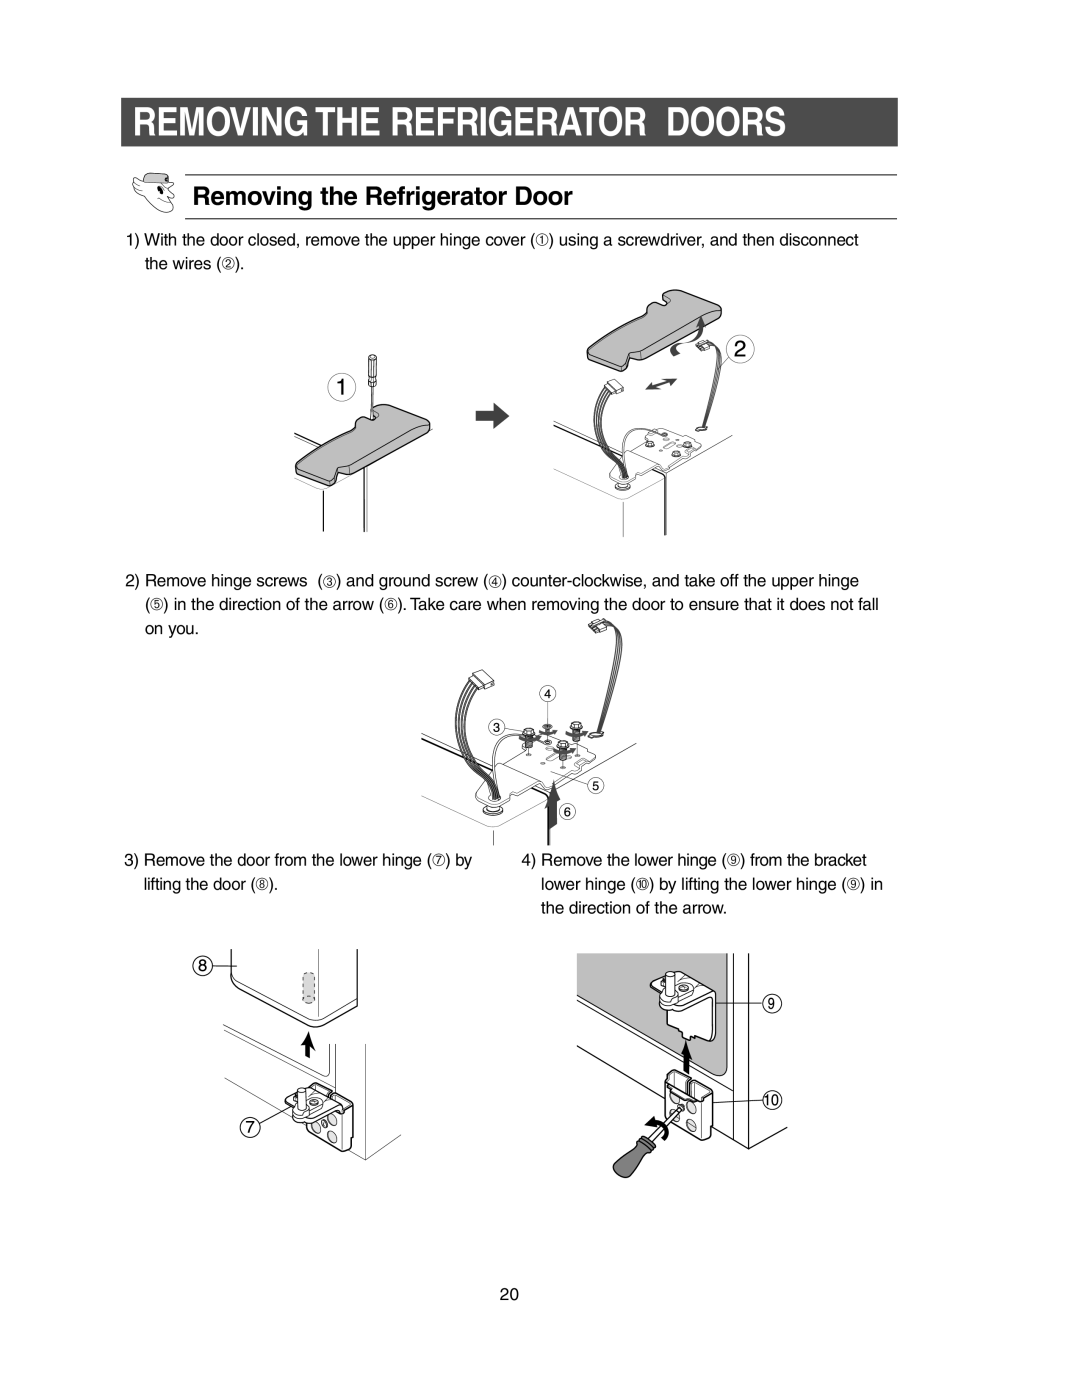 Samsung RS2555, RS2577, RS2533 owner manual Removing the Refrigerator Door, Removing The Refrigerator Doors 